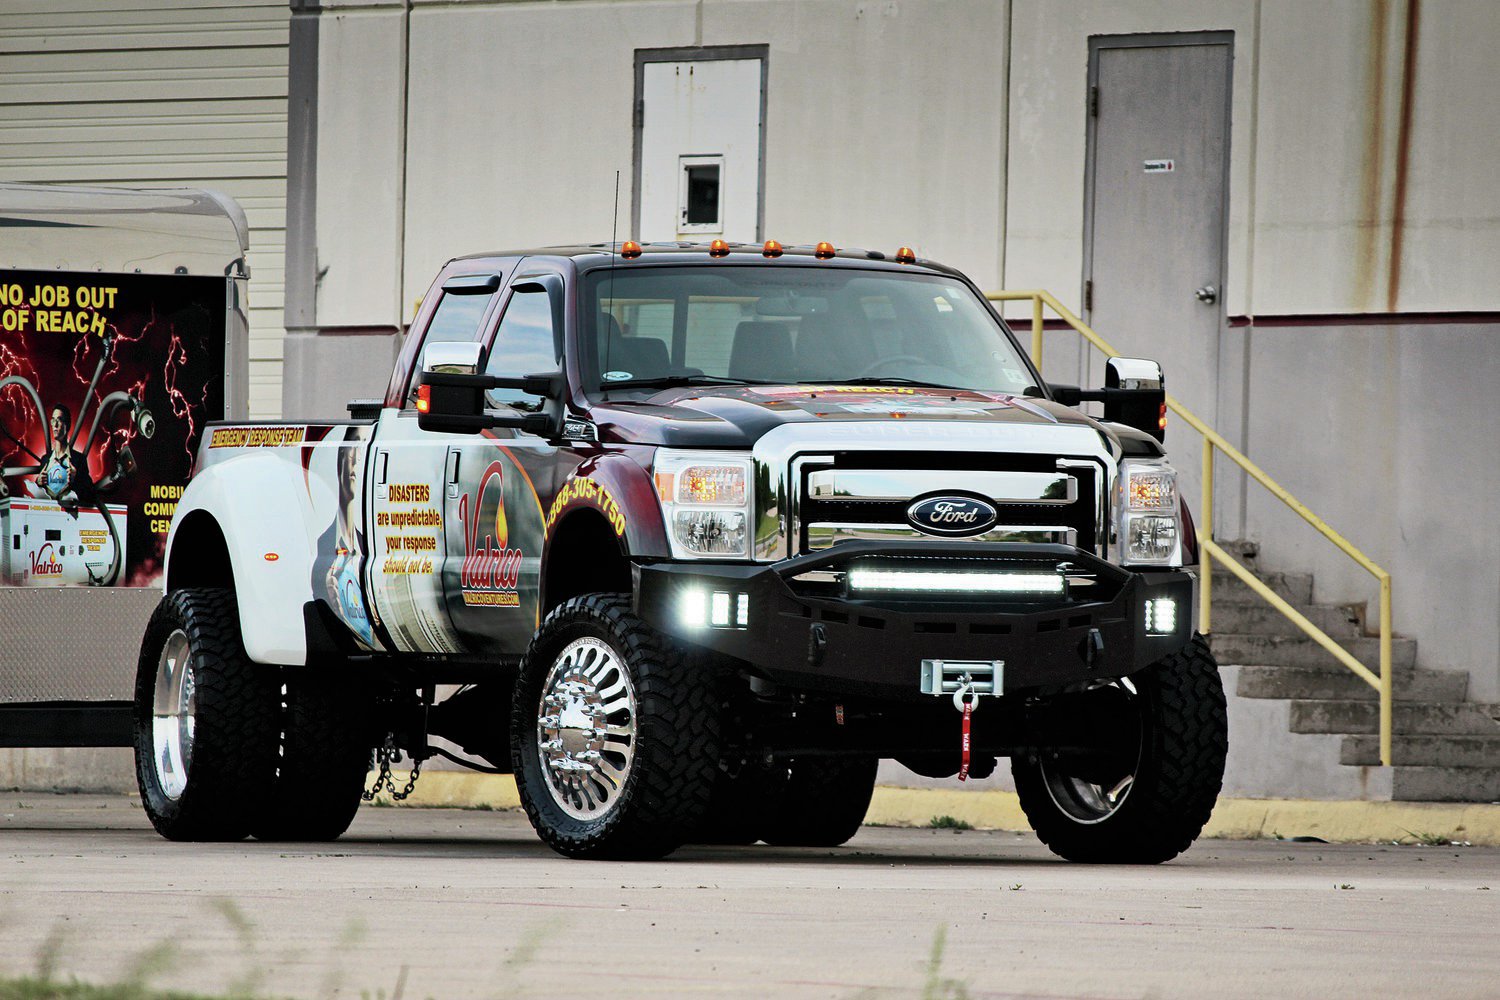 2013 Ford F-450 Super Duty - Recovery Effort